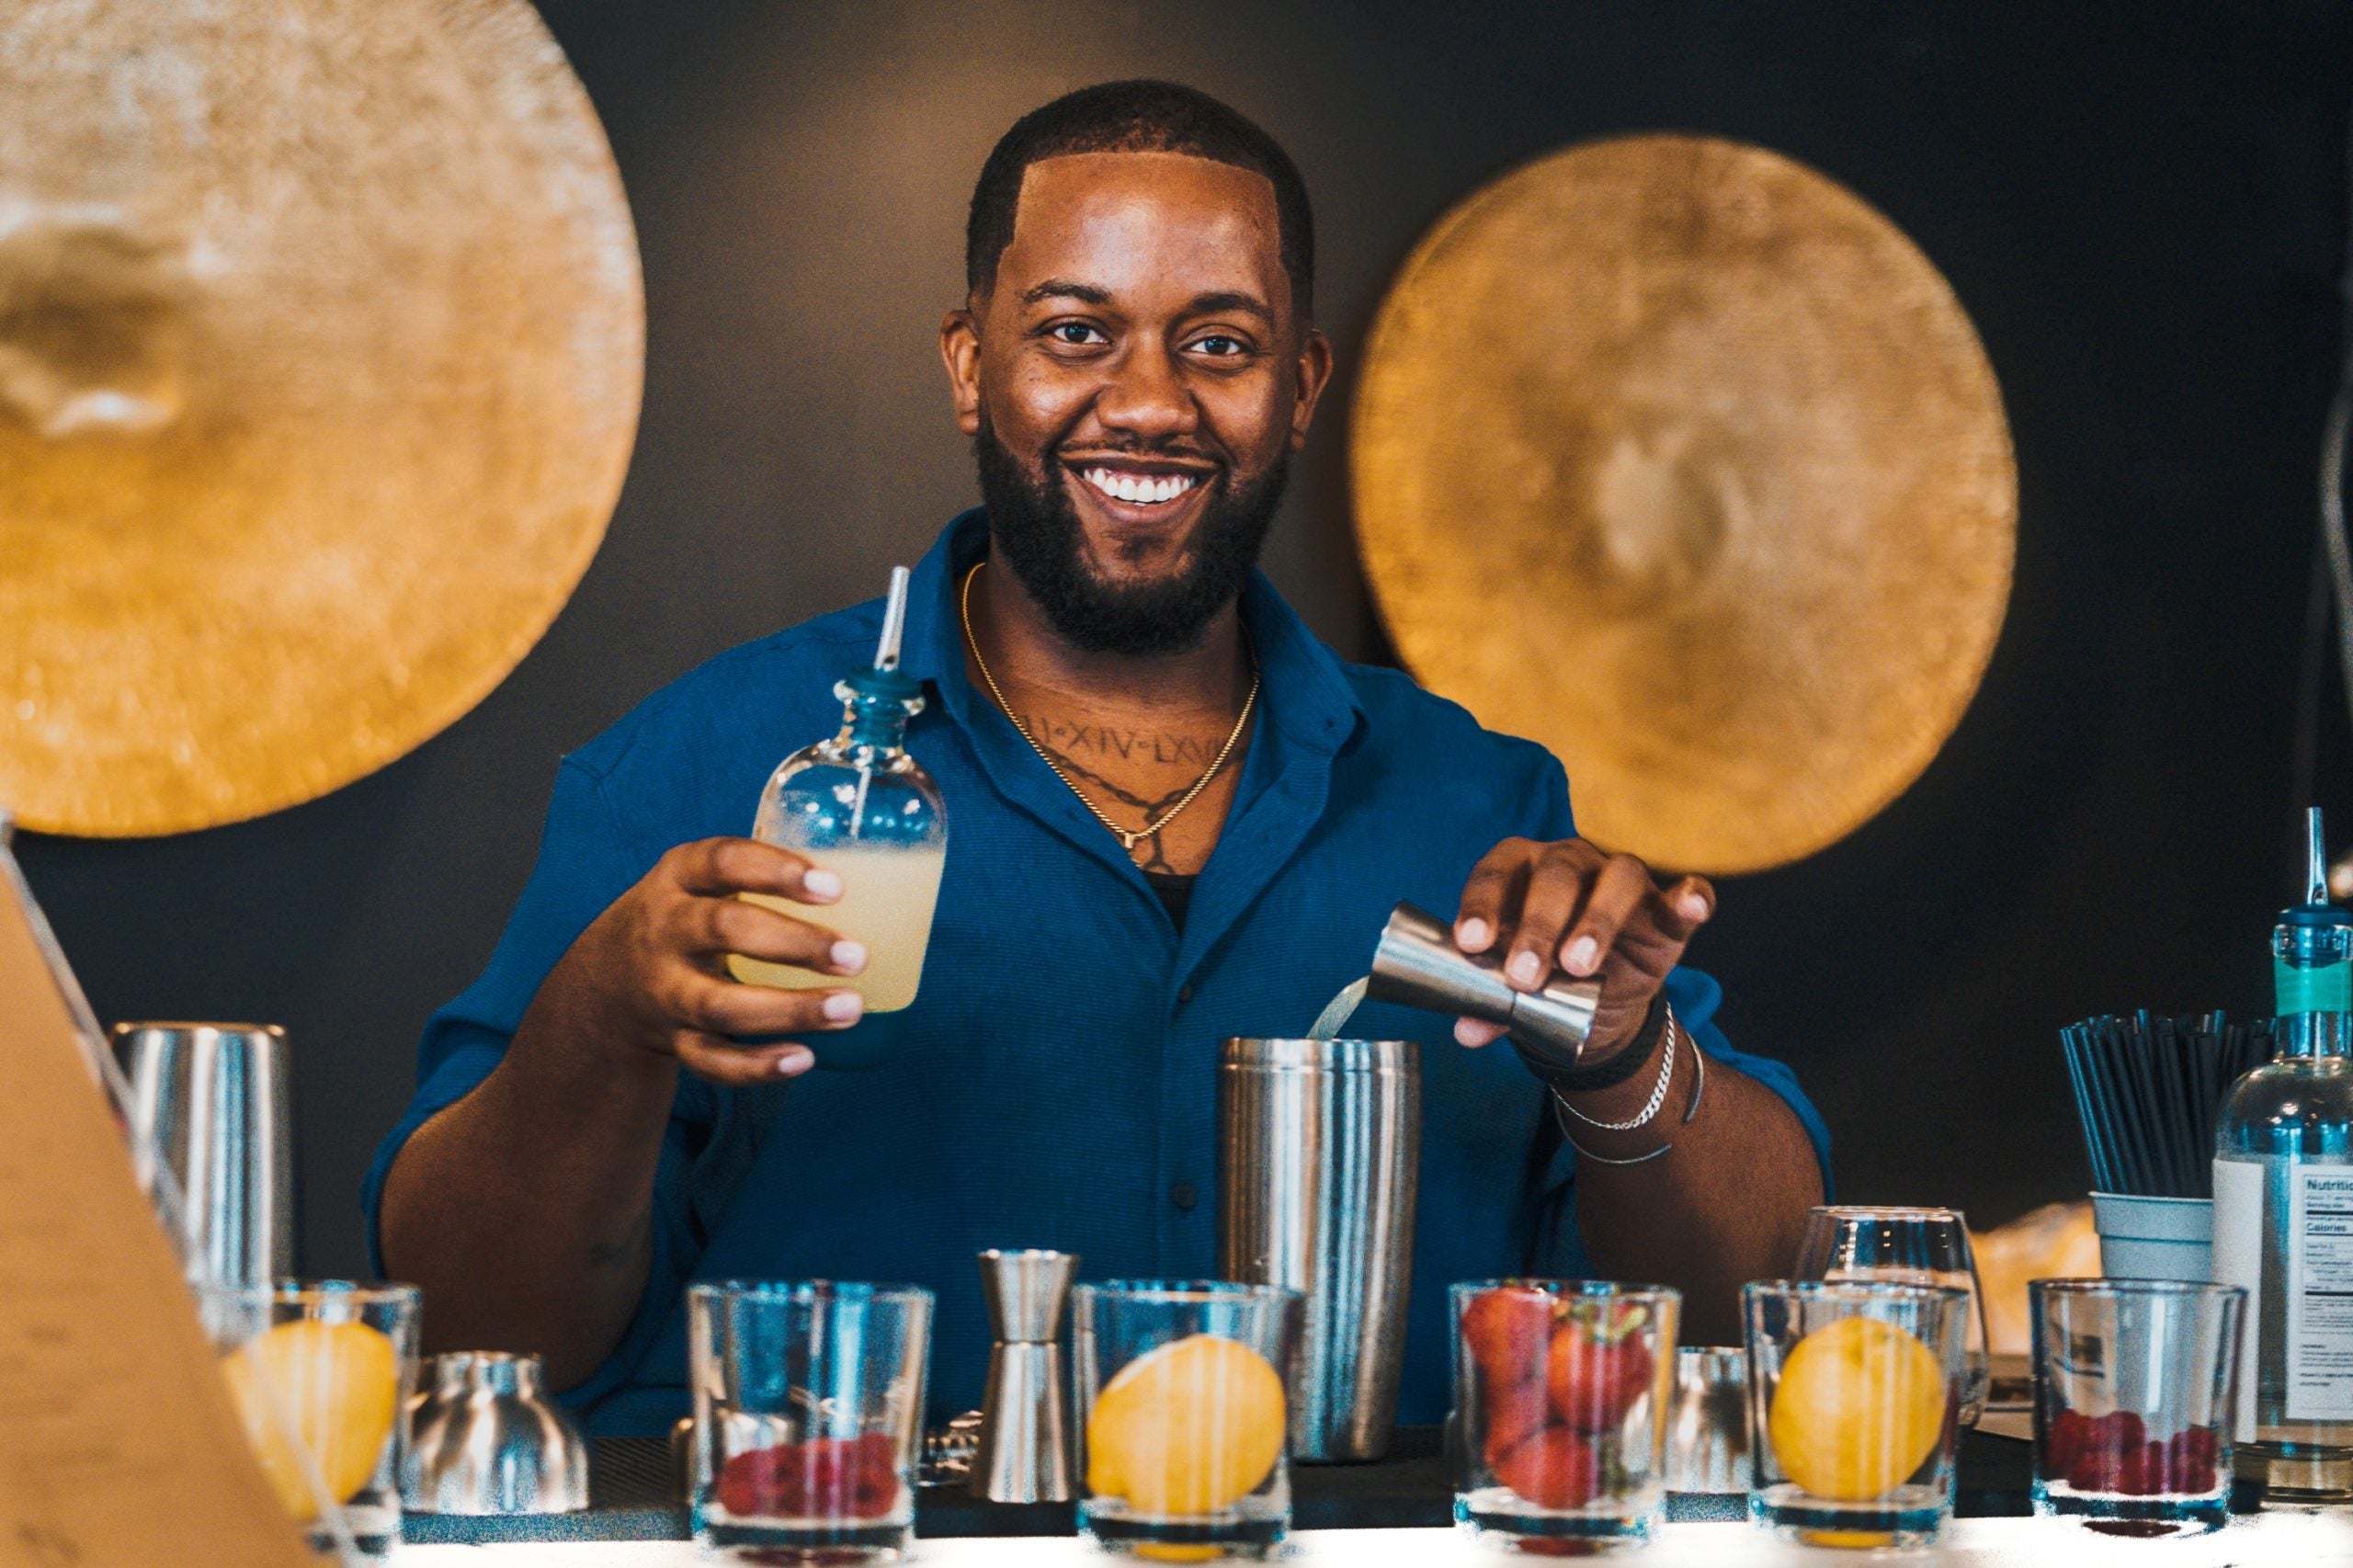 Celebrate Dry January With Mocktail Recipes From These Black Mixologists